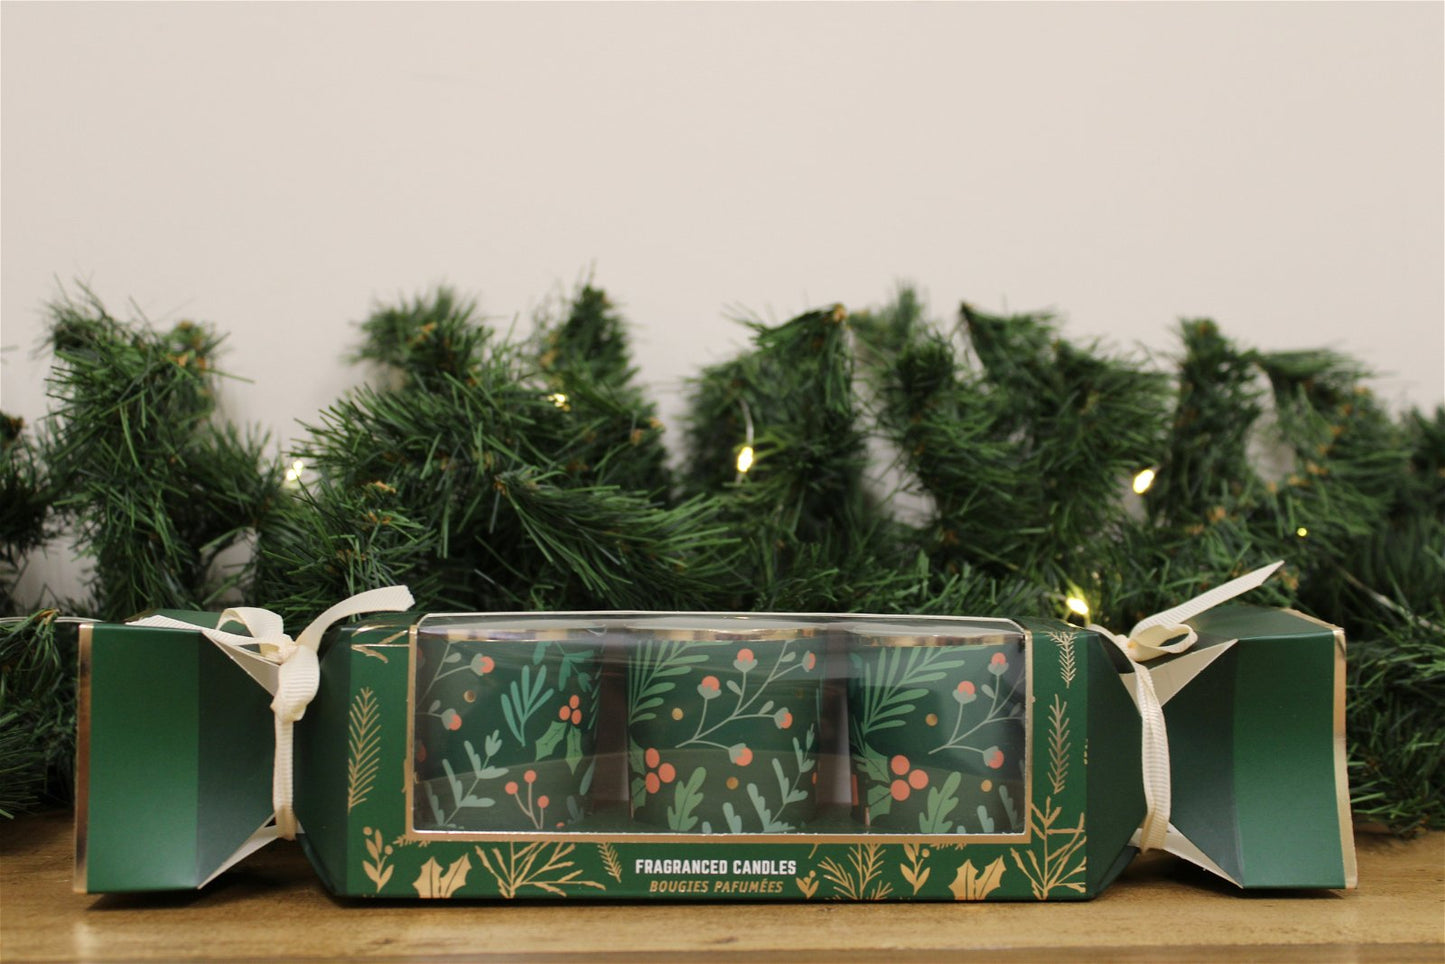 Cracker Gift-box with Mistletoe & Fir Candle-pots - a Cheeky Plant